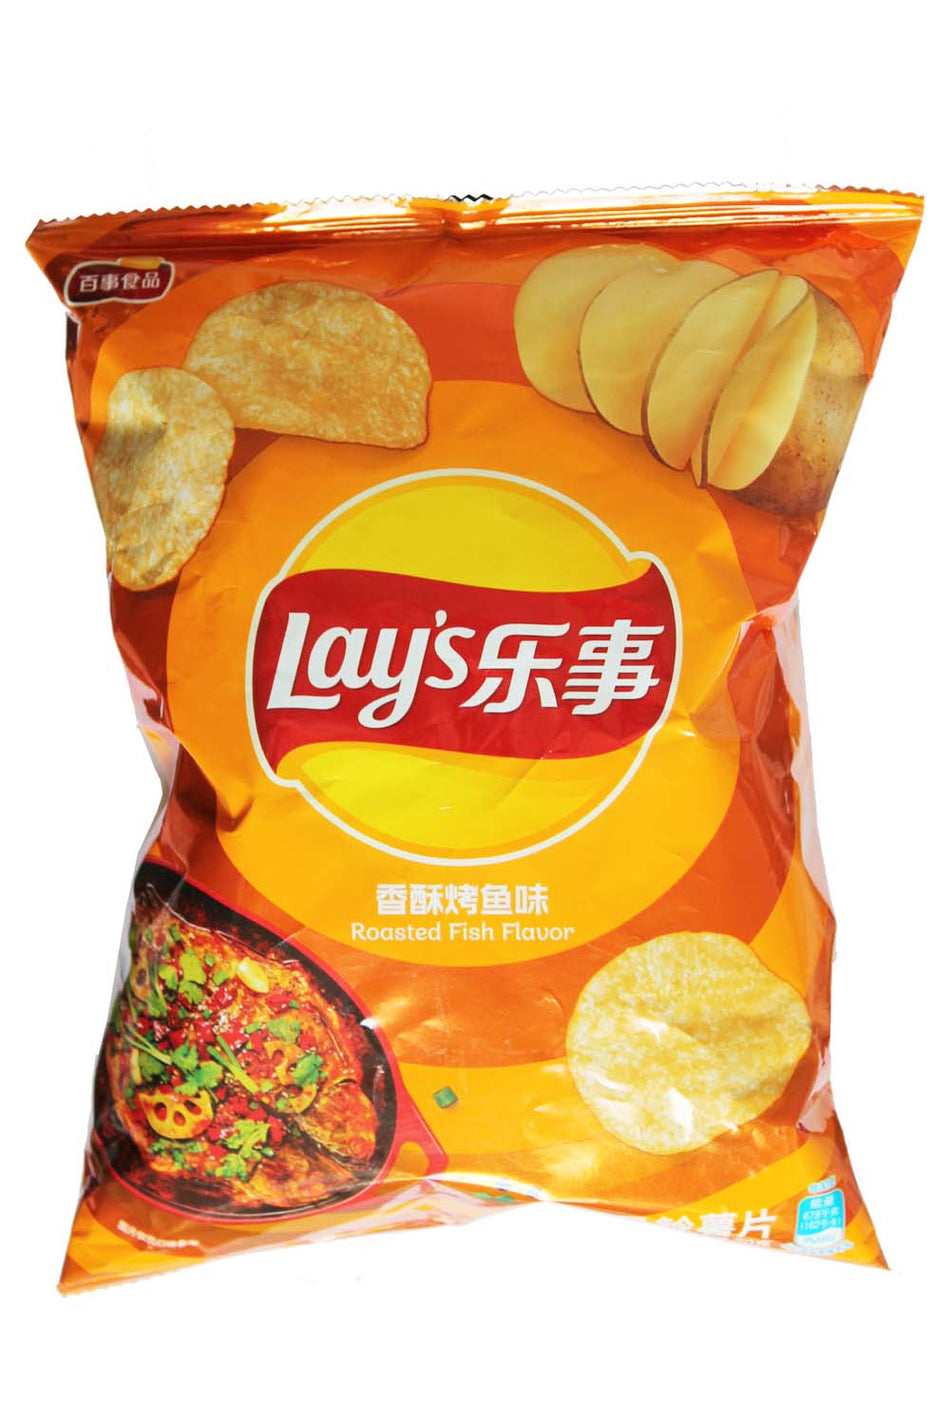 Lay's Roasted Fish flavor chip